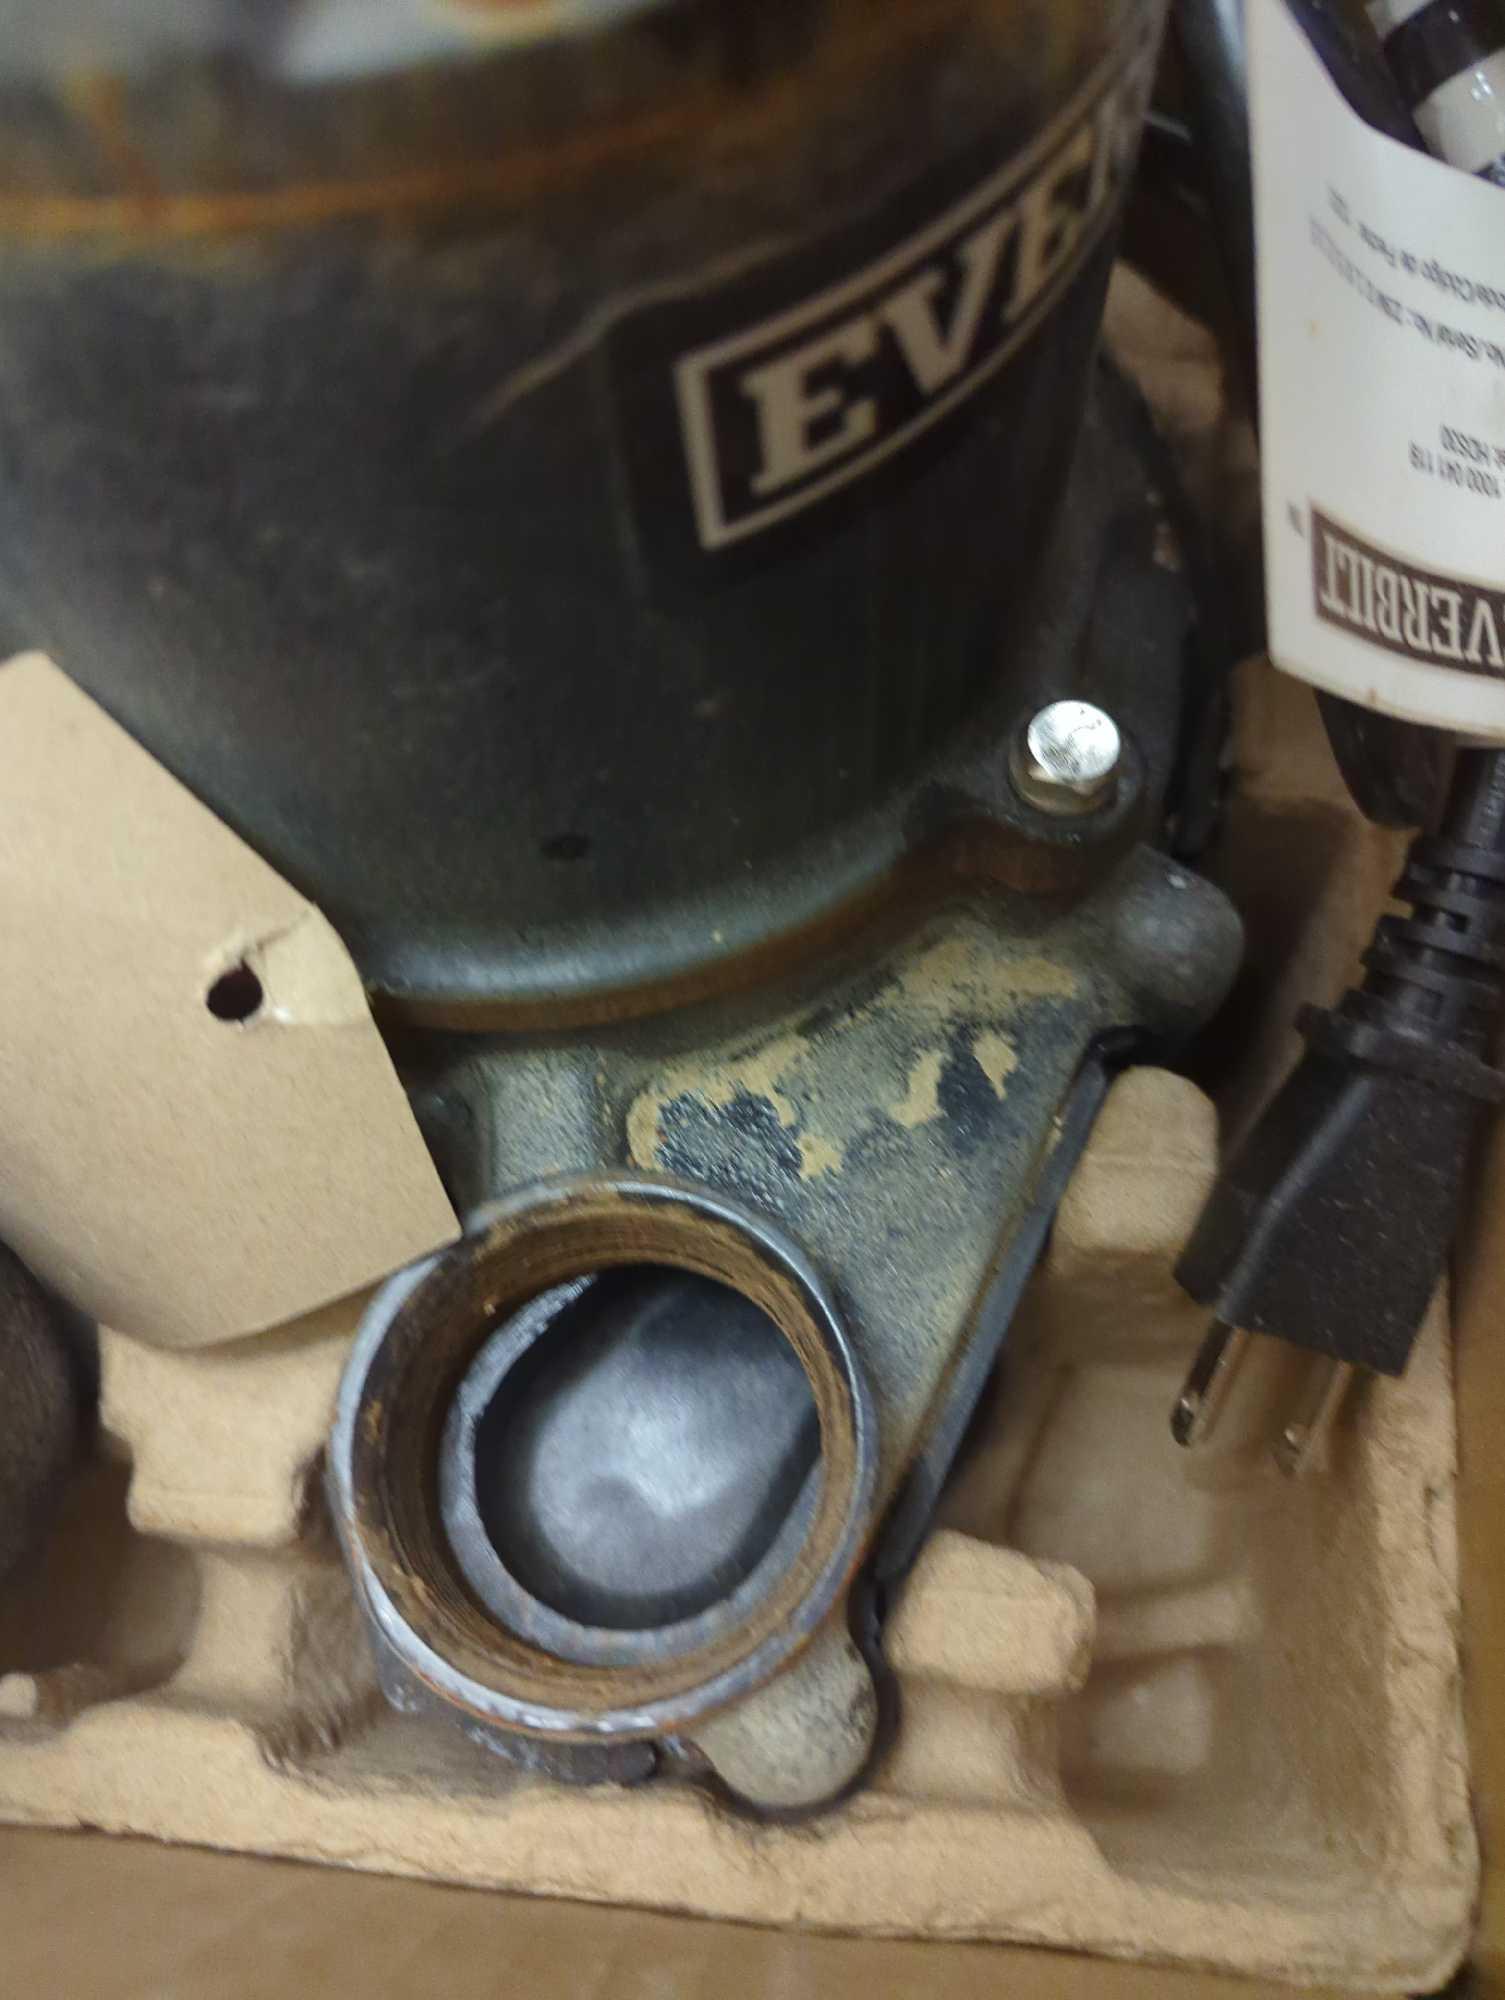 Everbilt 1/3 HP Cast Iron Sump Pump, Appears to be Used Is Rusted In Some Areas, Retail Price Value